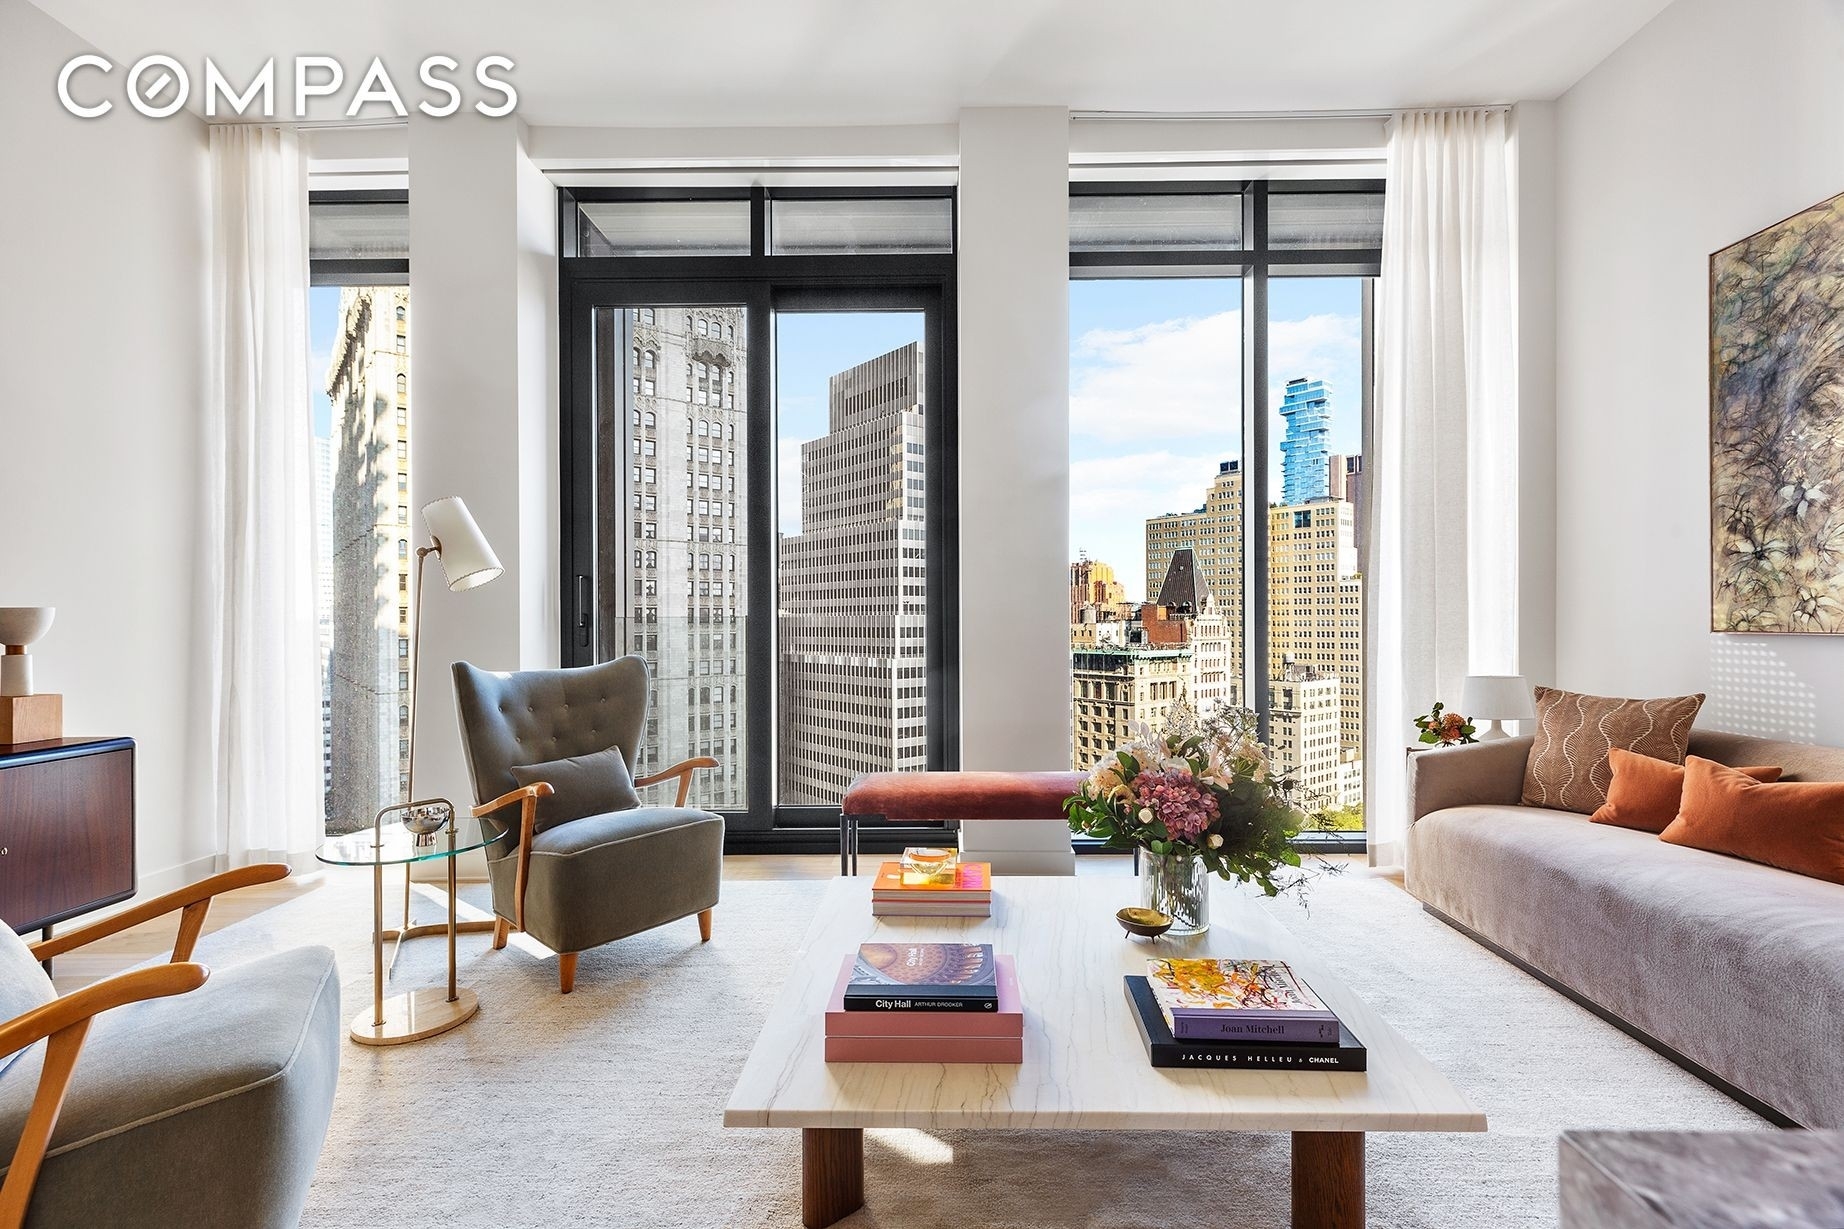 Condominium for Sale at No. 33 Park Row, 33 PARK ROW, 17A Financial District, New York, New York 10038